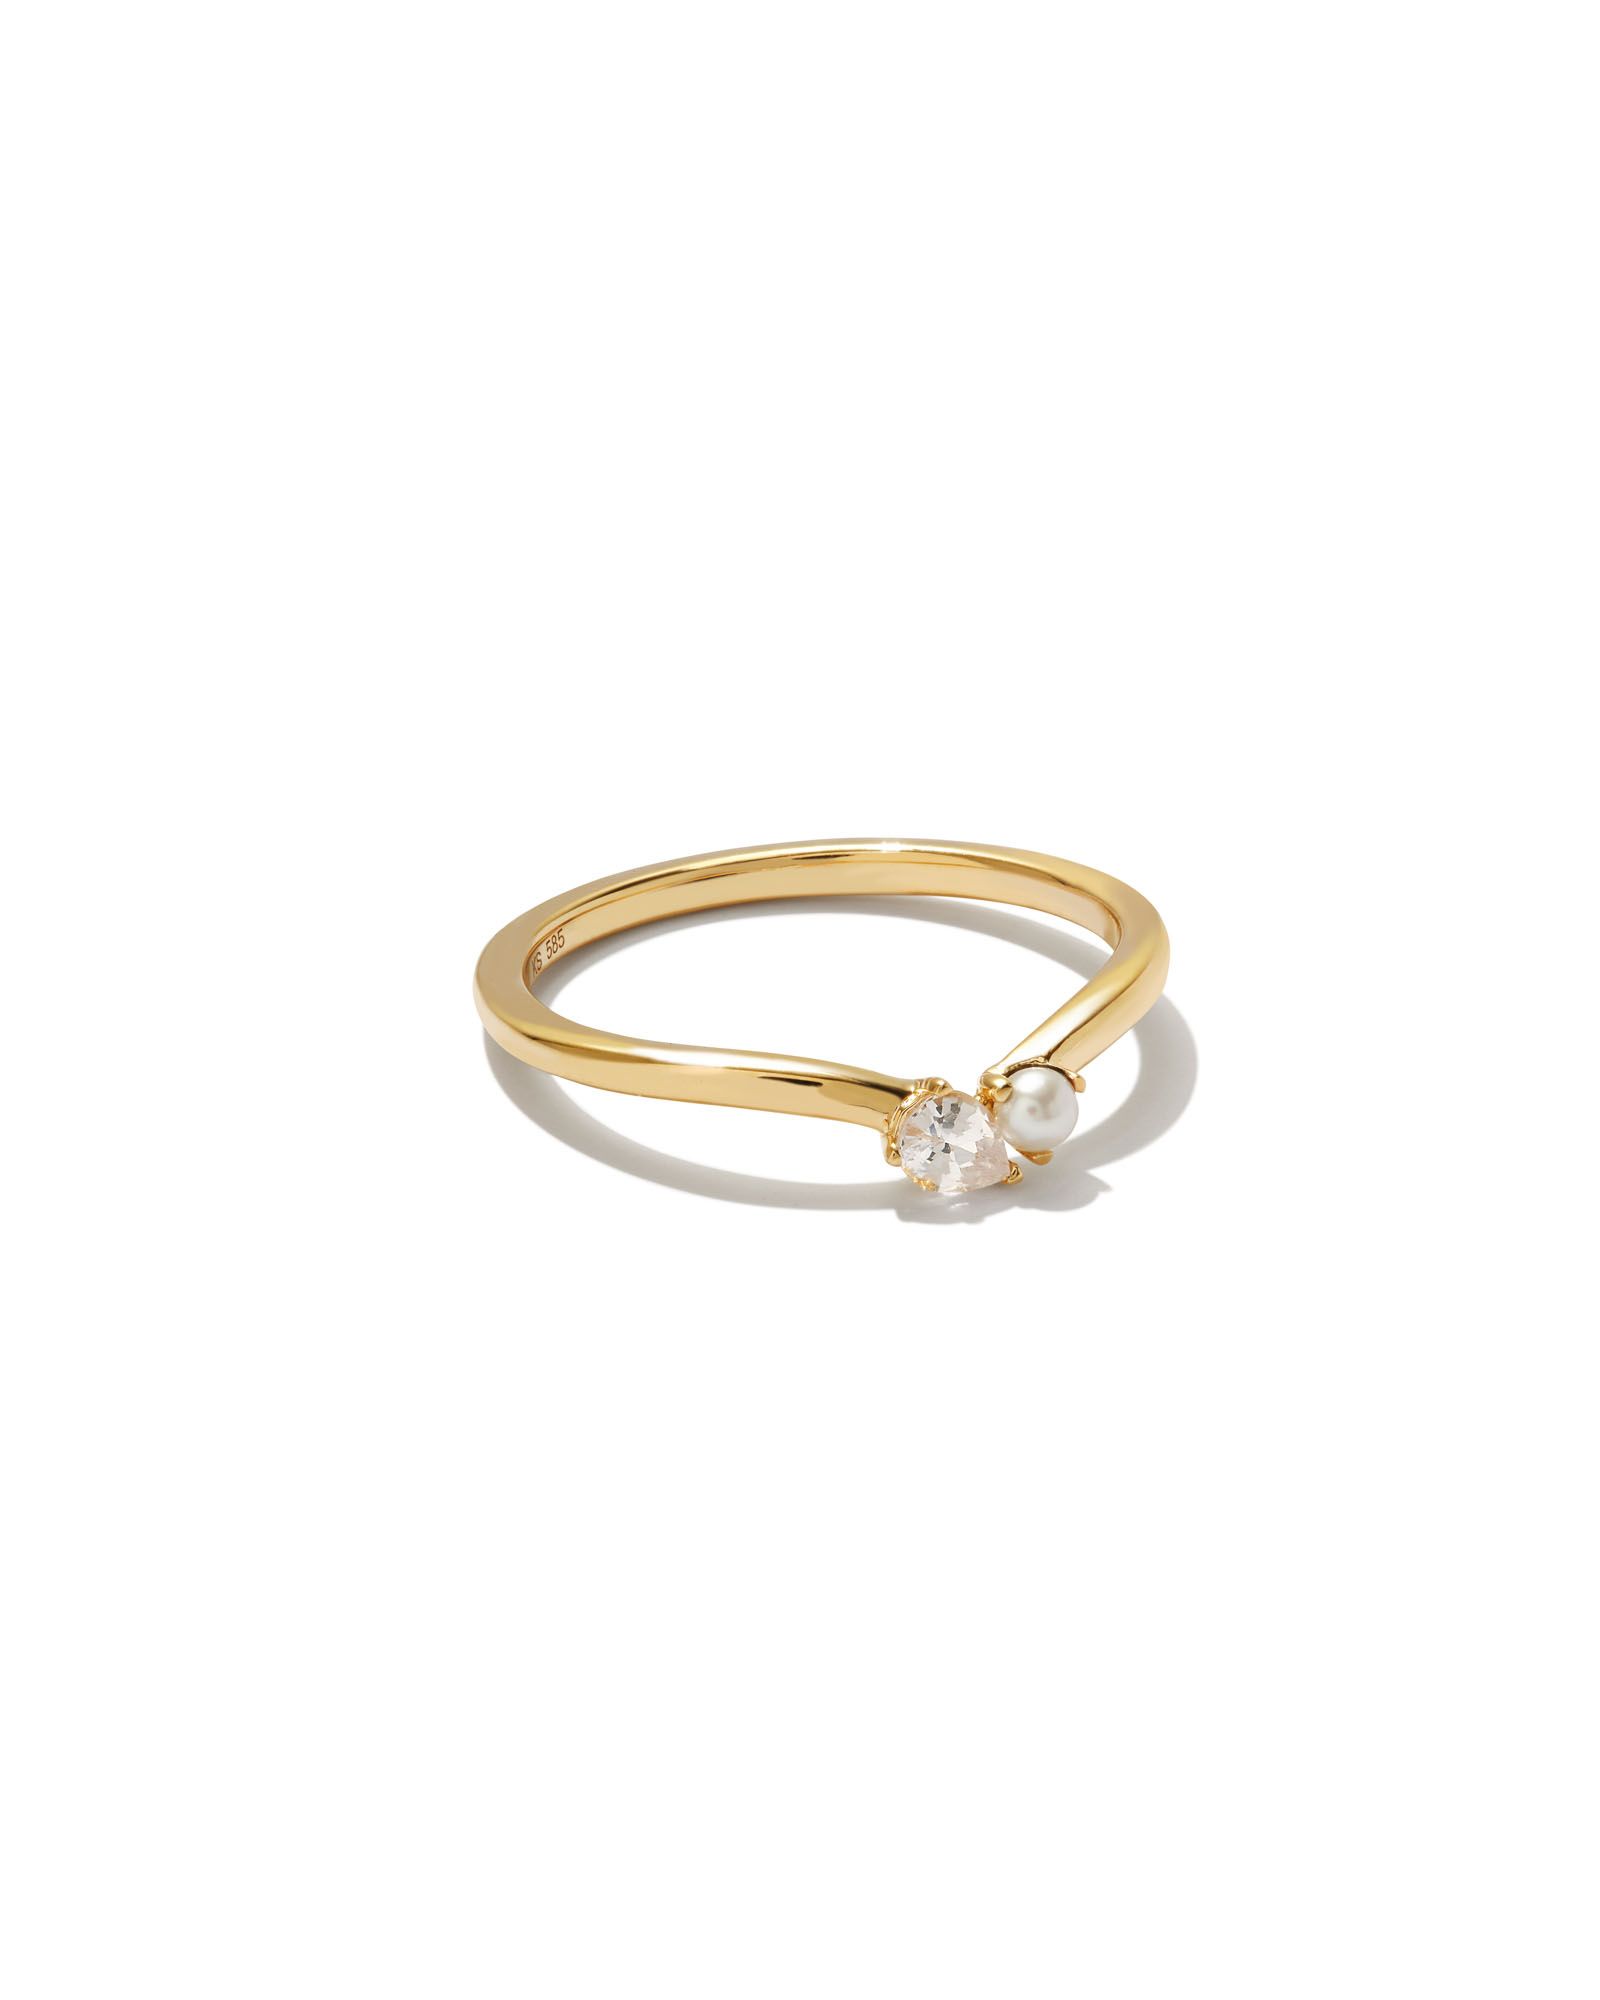 Toi et Moi 14k Yellow Gold Band Ring in White Sapphire and White Pearl | Kendra Scott | Kendra Scott